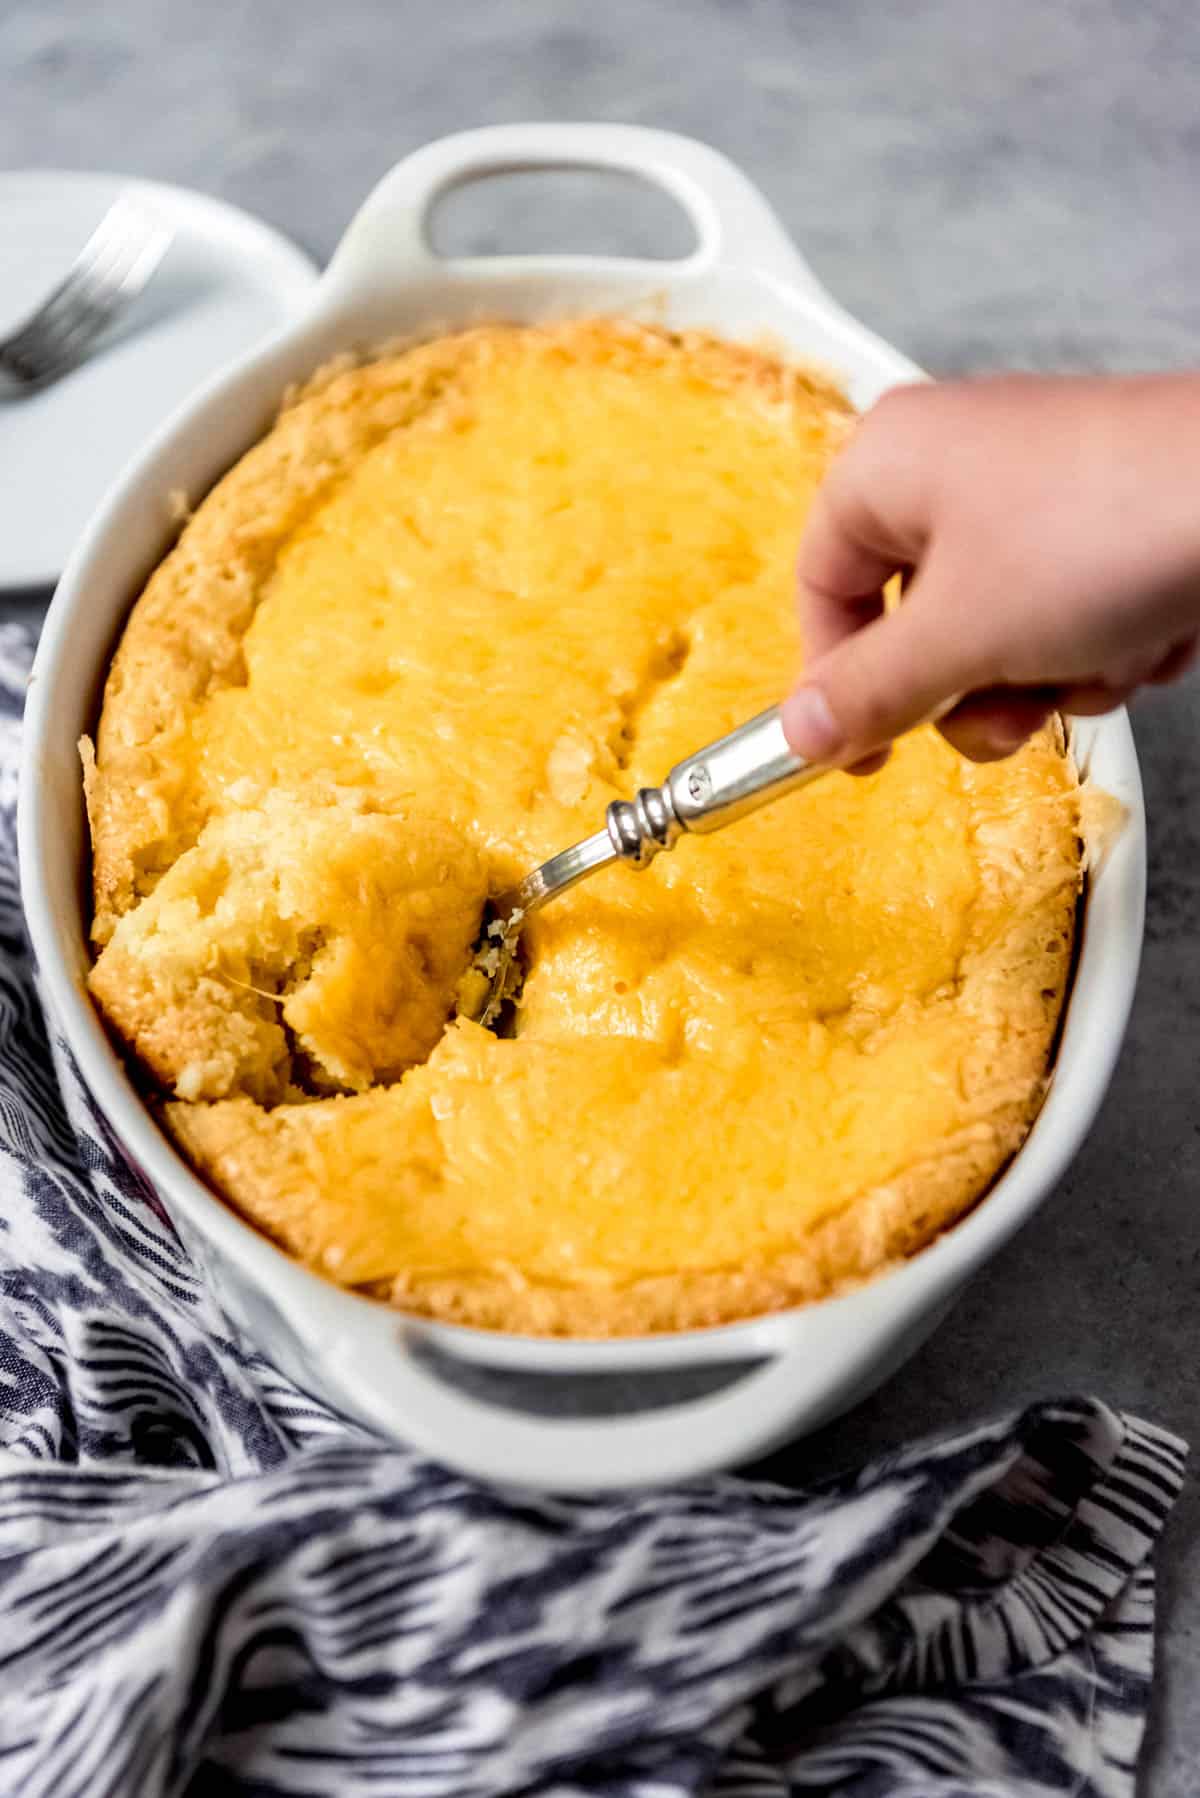 An image of a hand taking a big scoop of corn pudding out of a casserole dish.